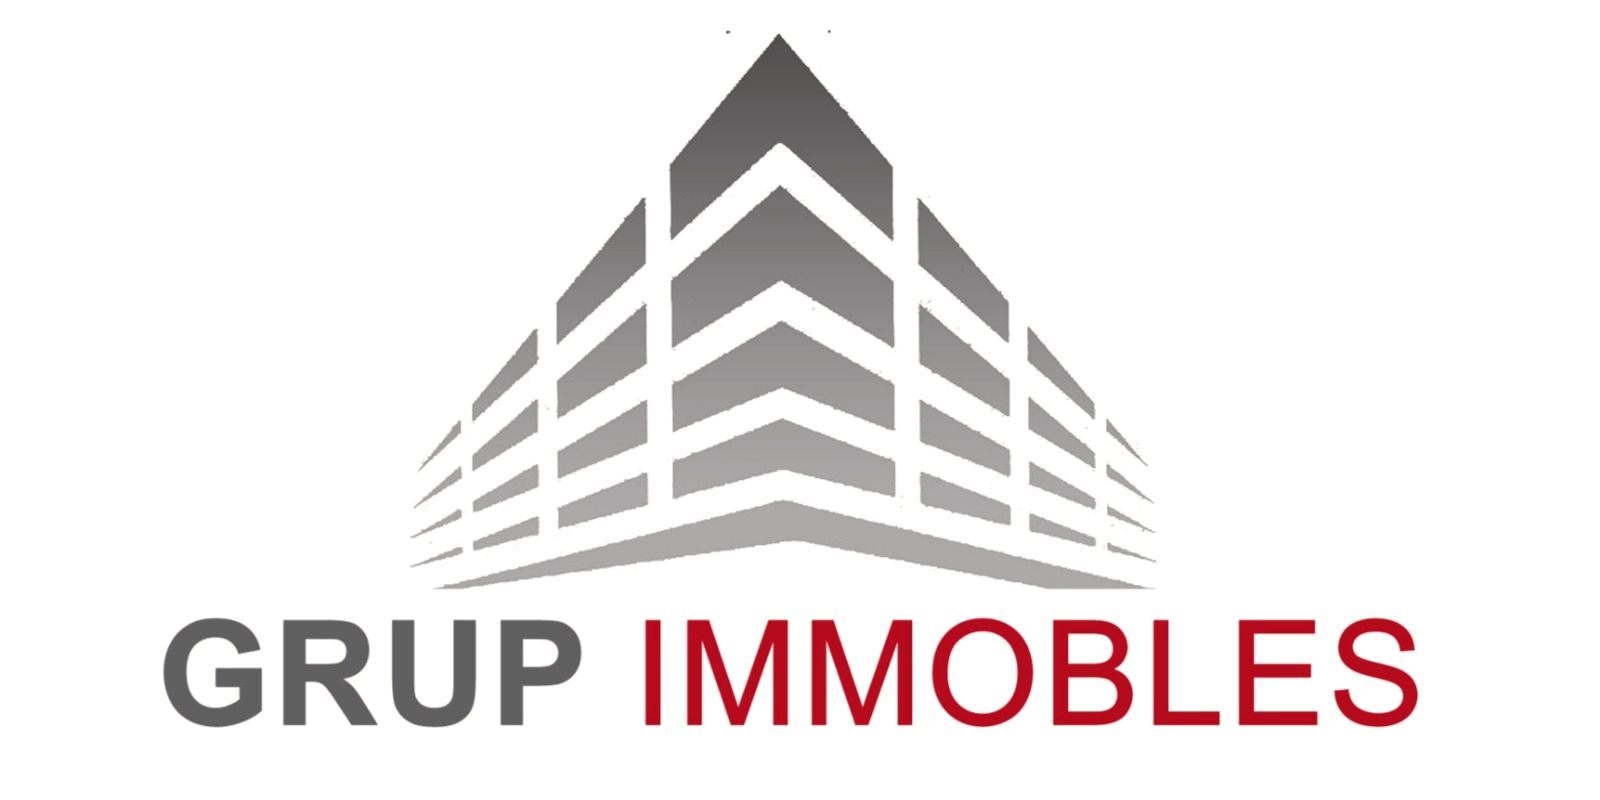 GRUP IMMOBLES